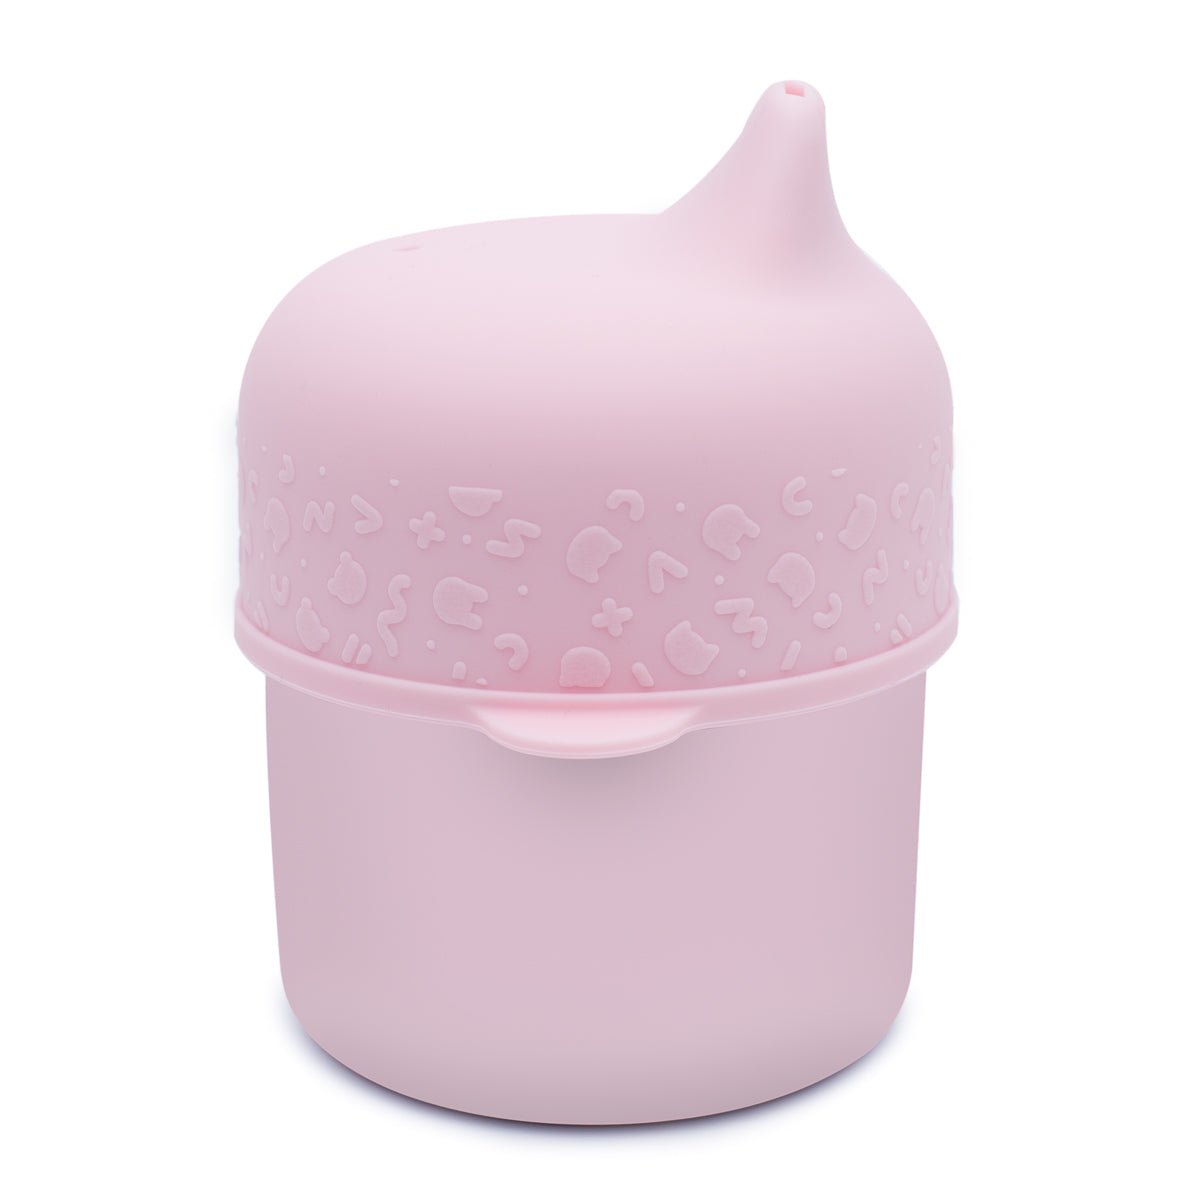 Sippie Cup Set in Powder Pink without straw